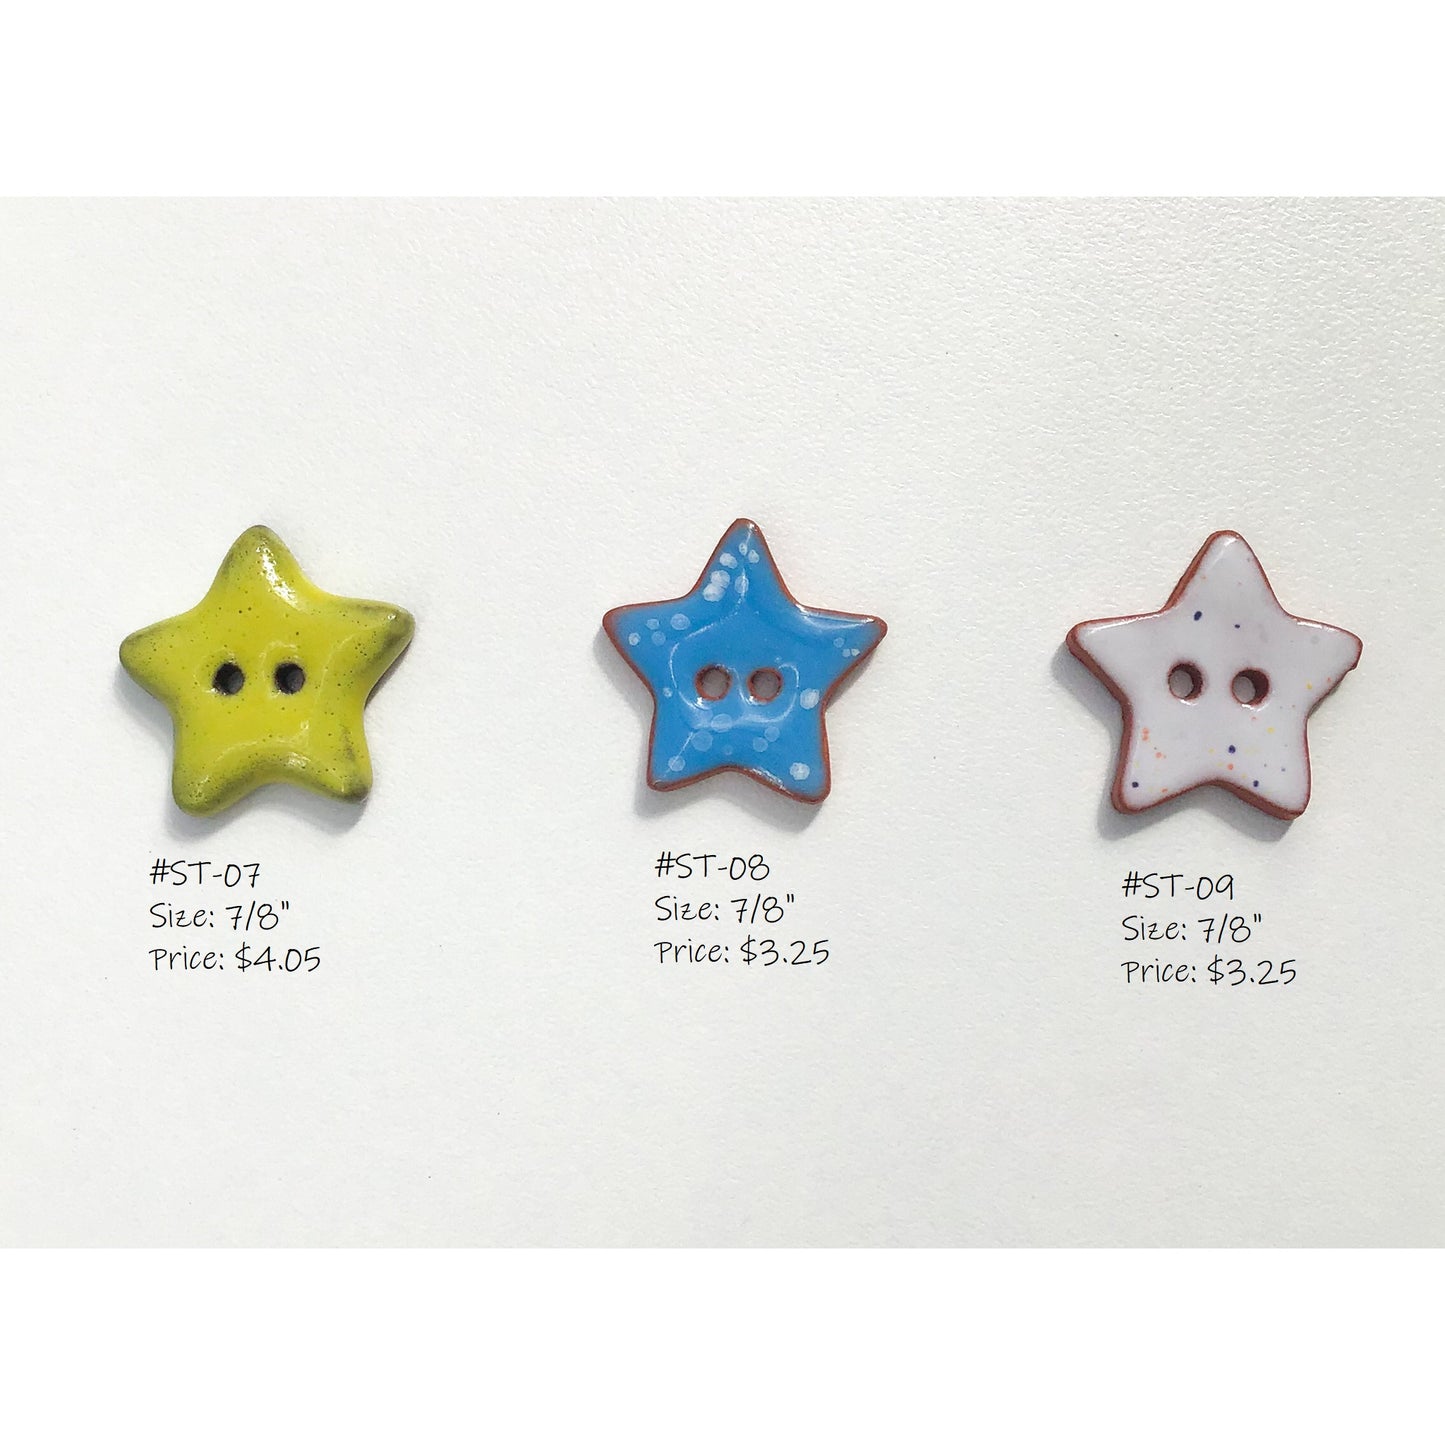 Stars Button Collection: Artisan Ceramic Buttons - Decorative Star Buttons (ws-240)